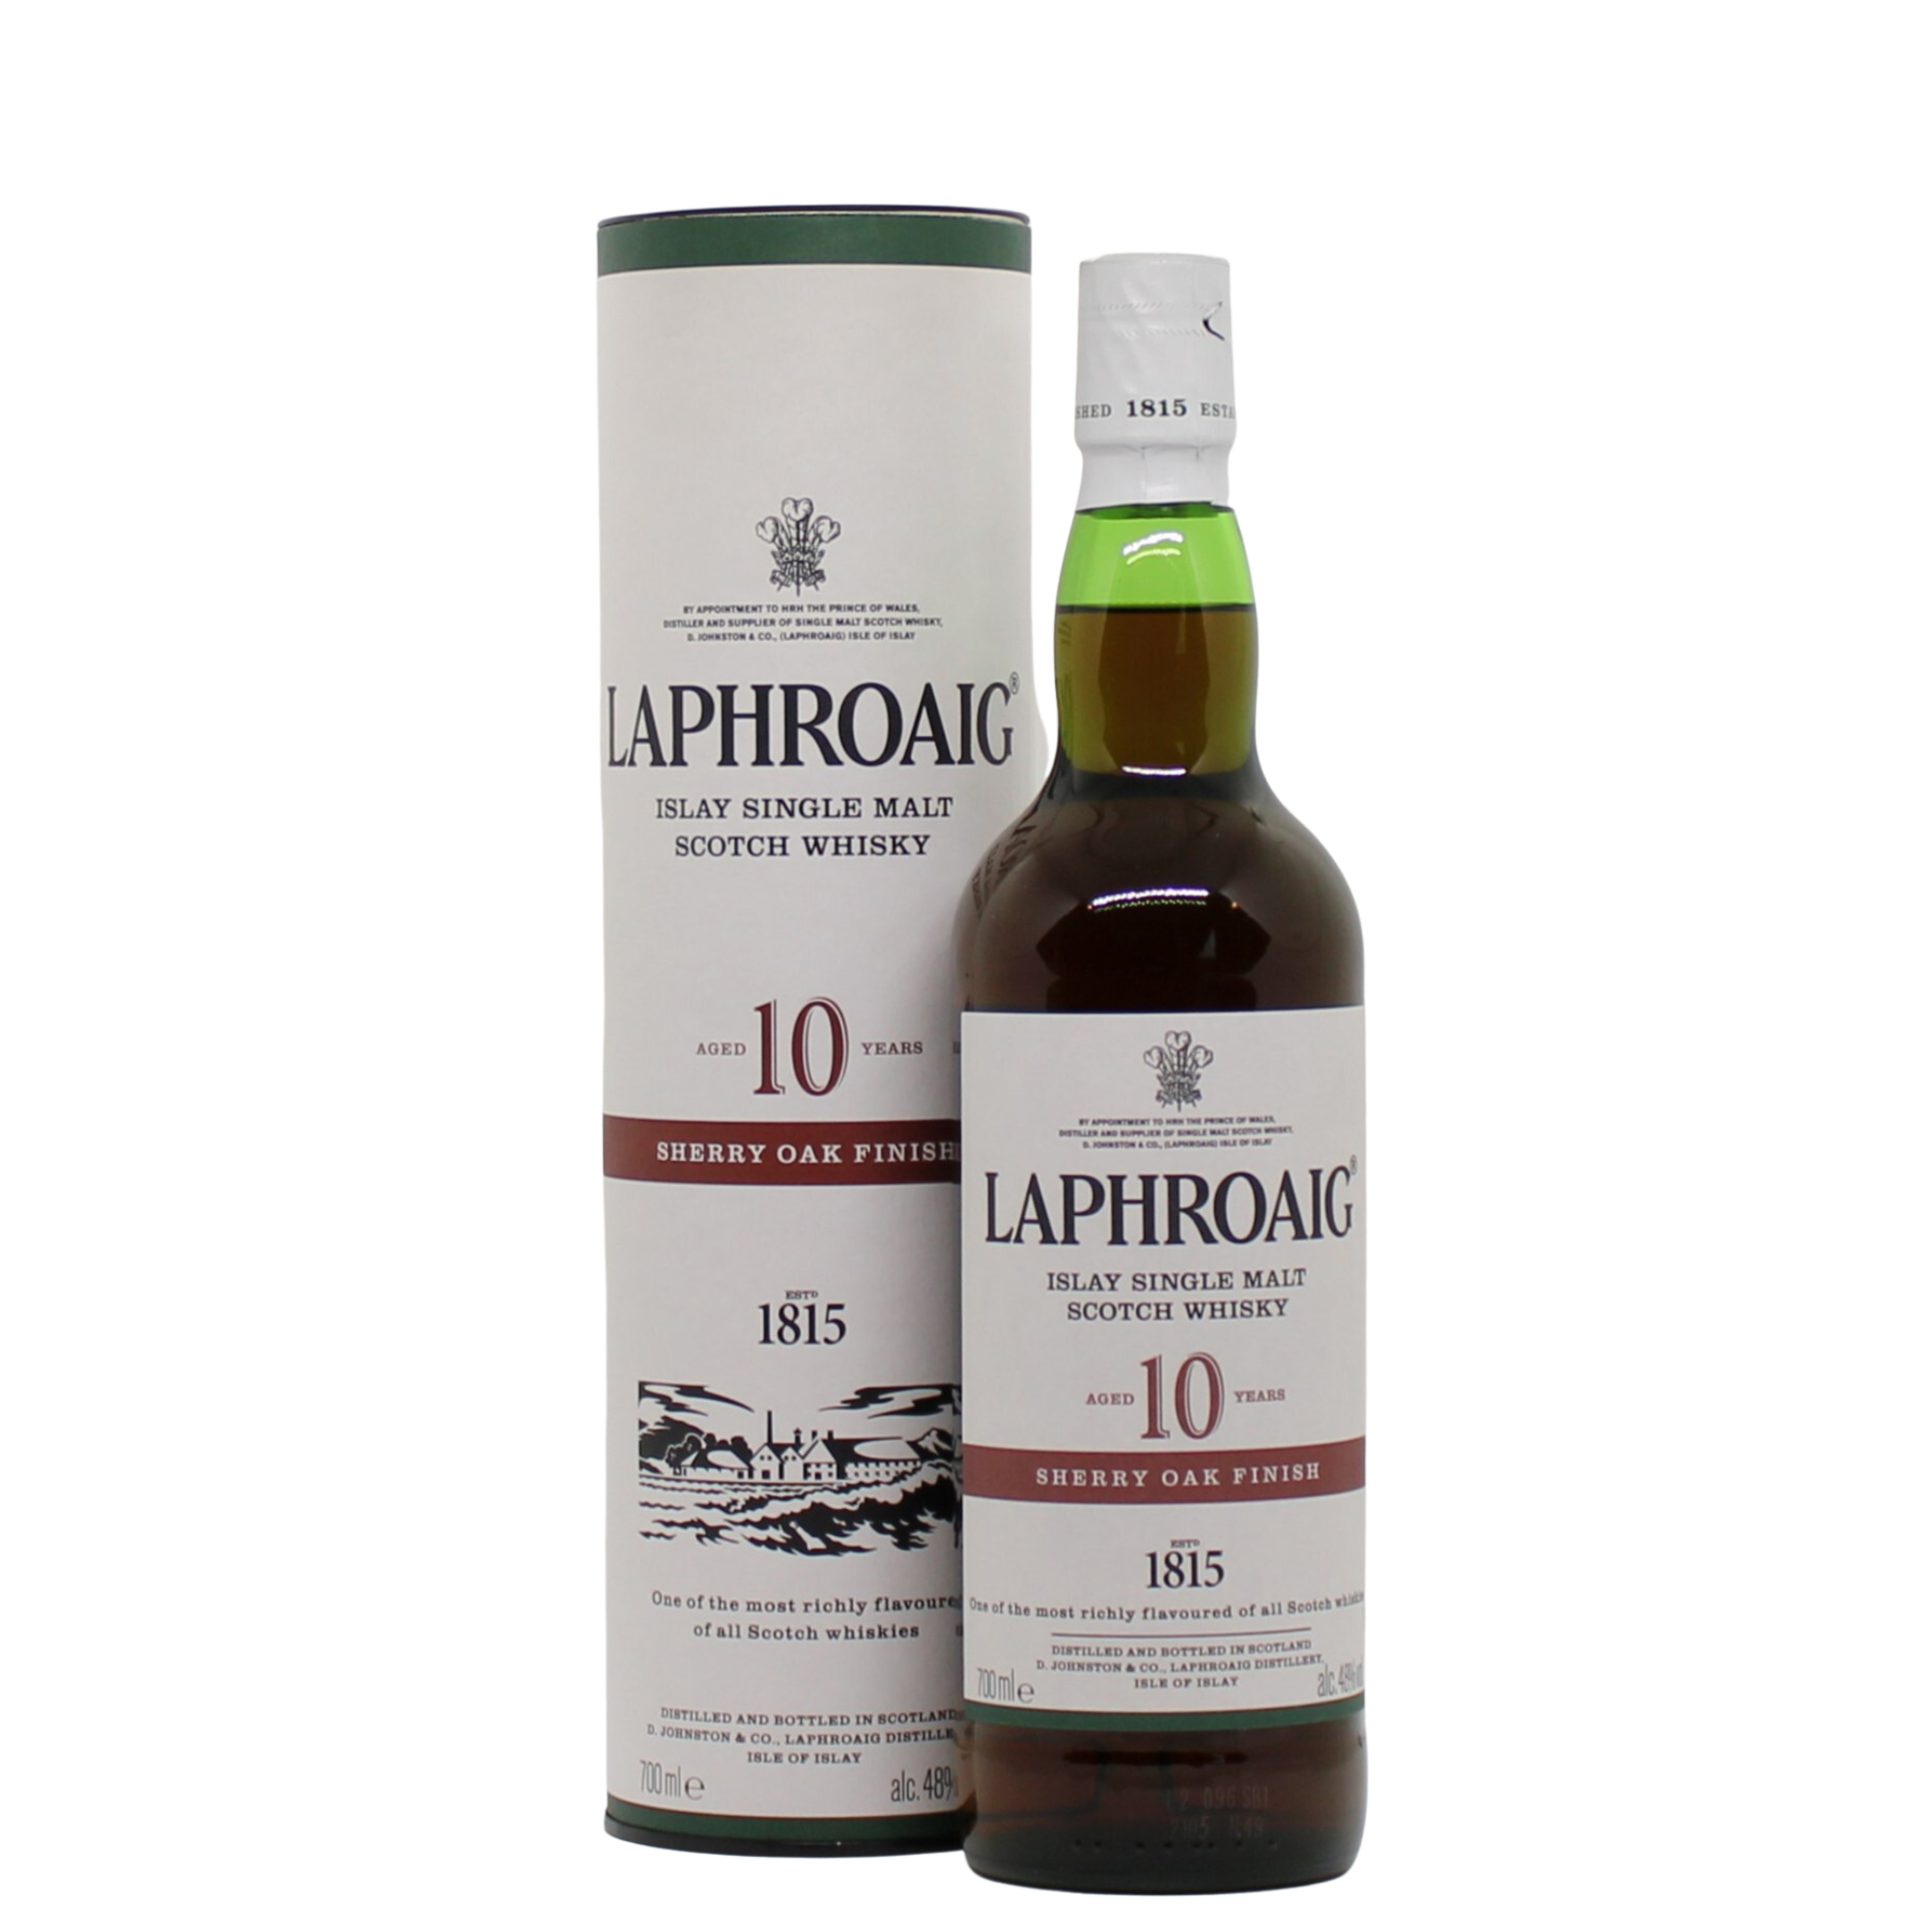 This unique expression from Laphroaig combines the 10 Year Old Laphroaig matured in ex-Bourbon barrels with a further finishing ex- Oloroso Sherry Casks delivering a full bodied character of sweet aromatic flavours along with Manuka Honey, maple syrup, cloves, grilled bacon and peat smoke.